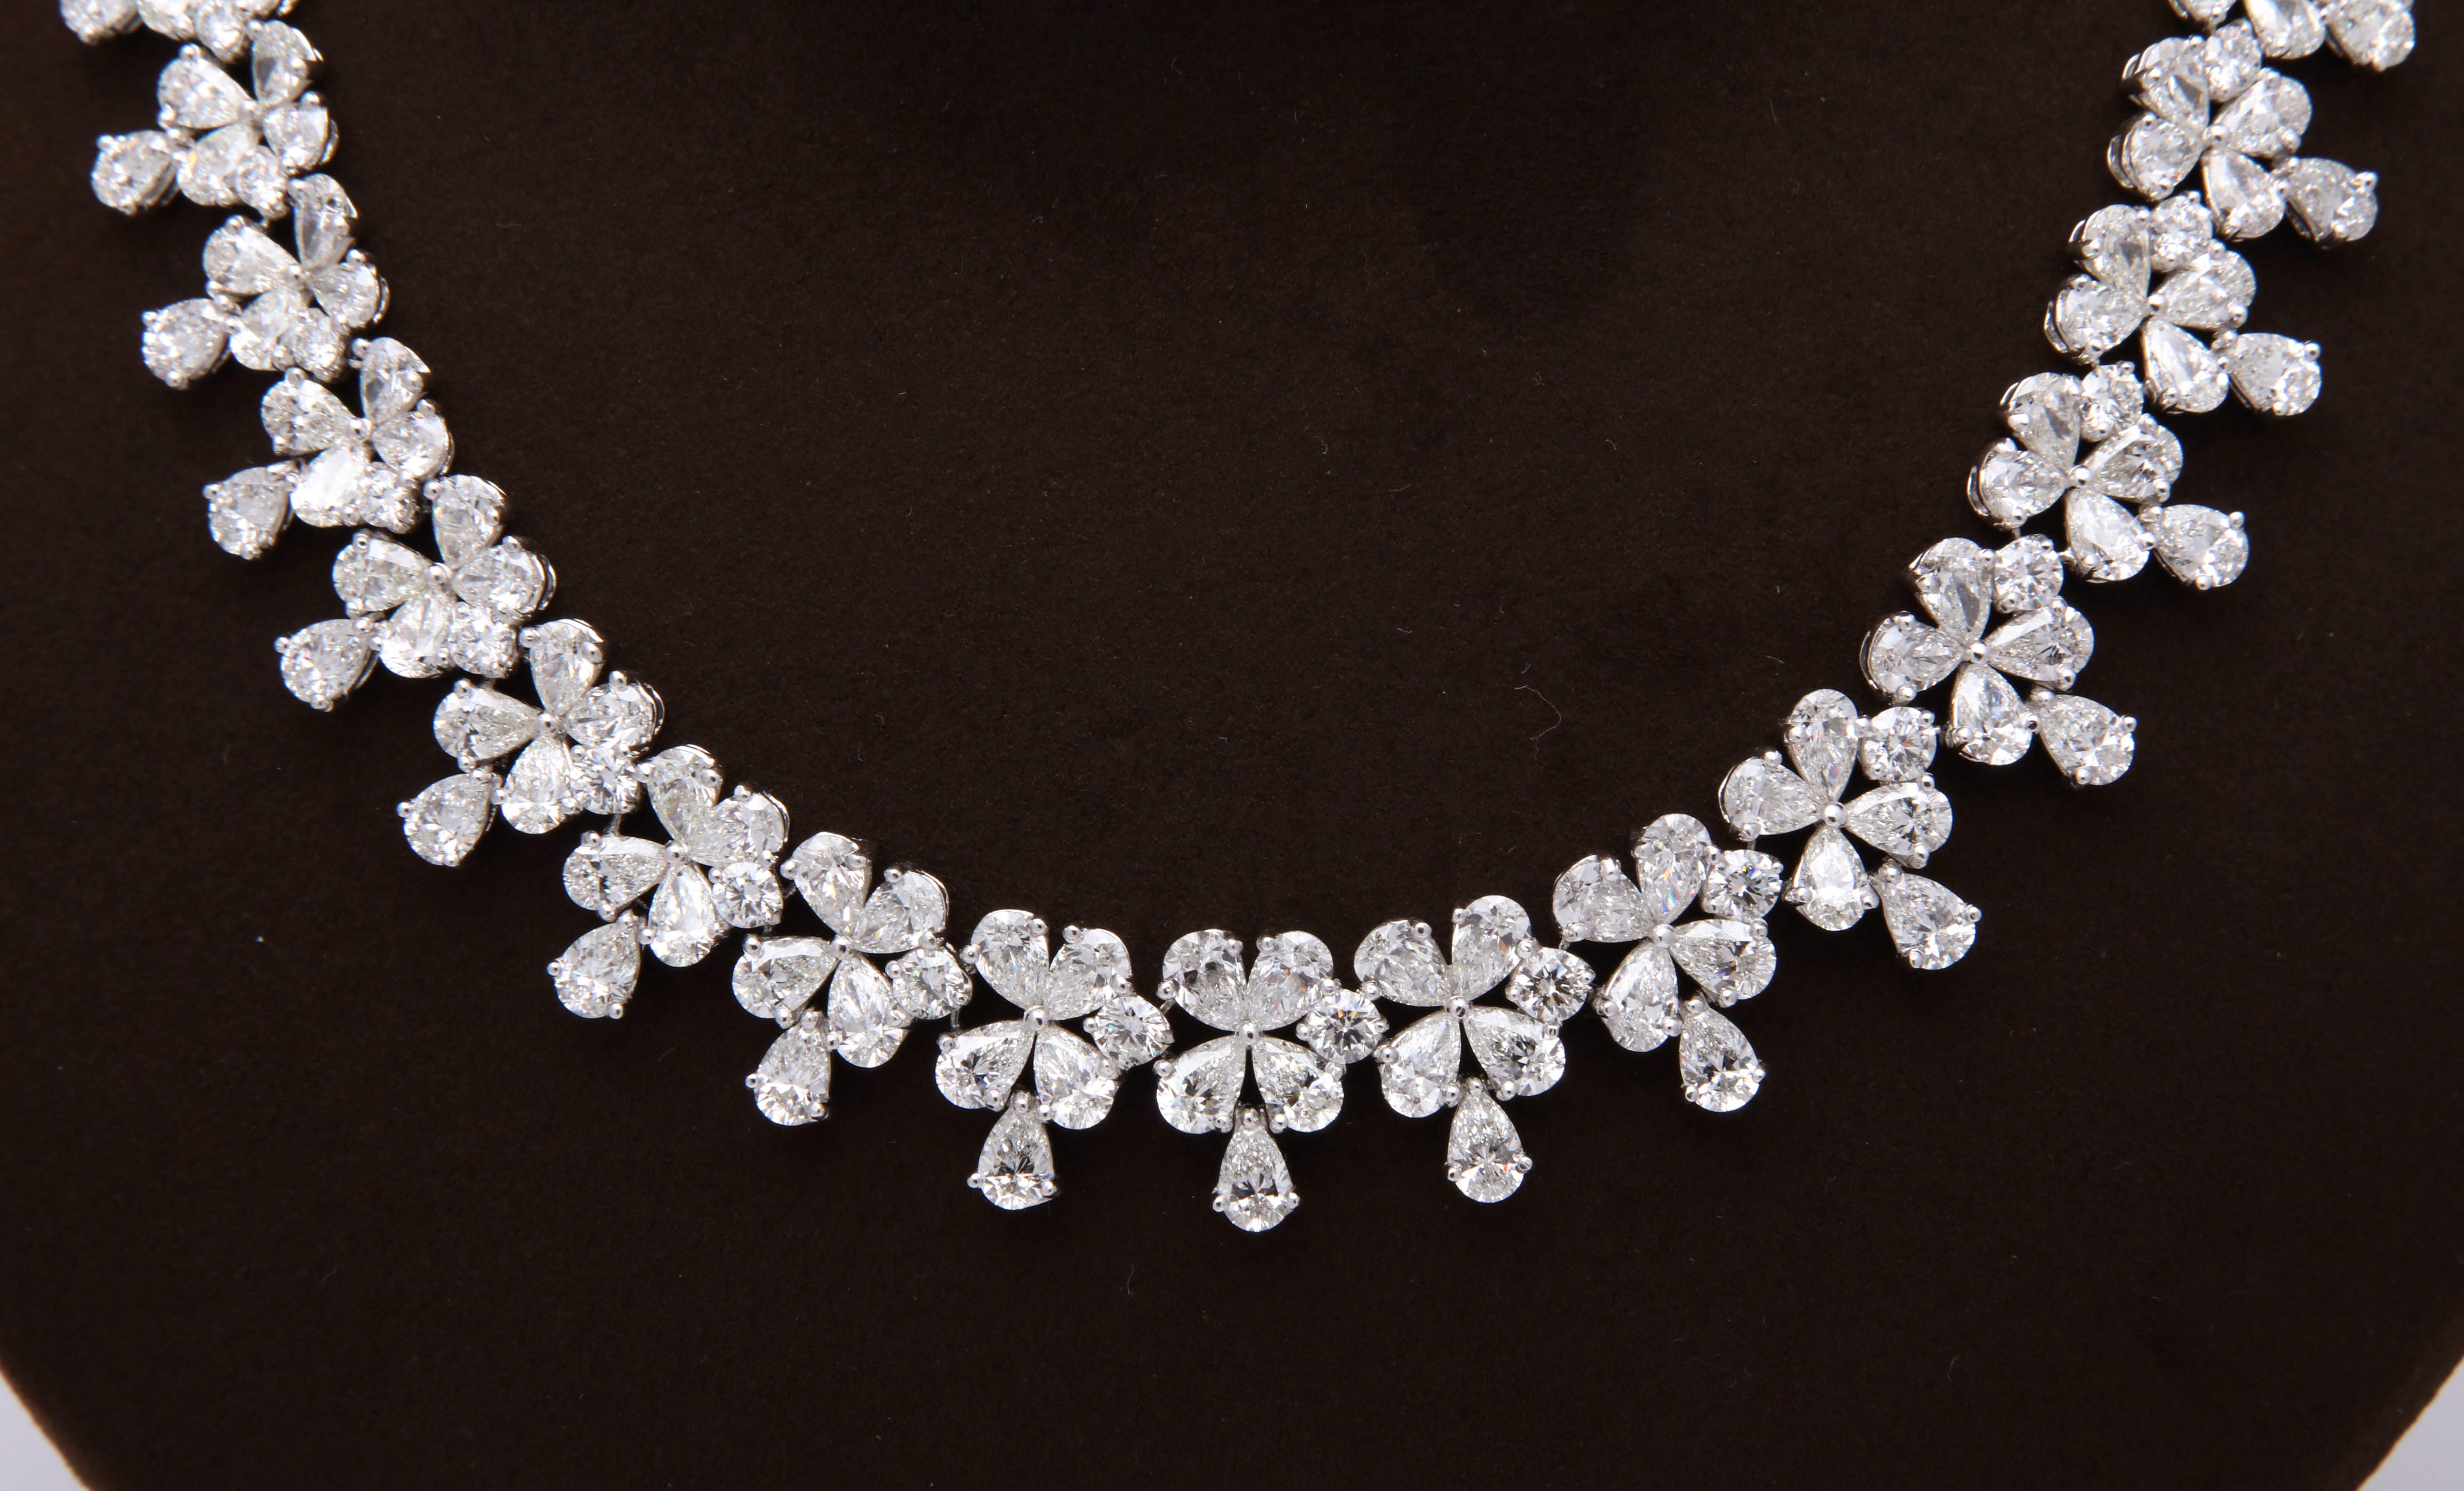 

A BEAUTIFUL piece!!

60.17 carats of white pear shaped and round brilliant cut diamonds set in platinum.

A timeless necklace that will compliment other jewelry in your collection. 

16.5 inch length which can be adjusted
